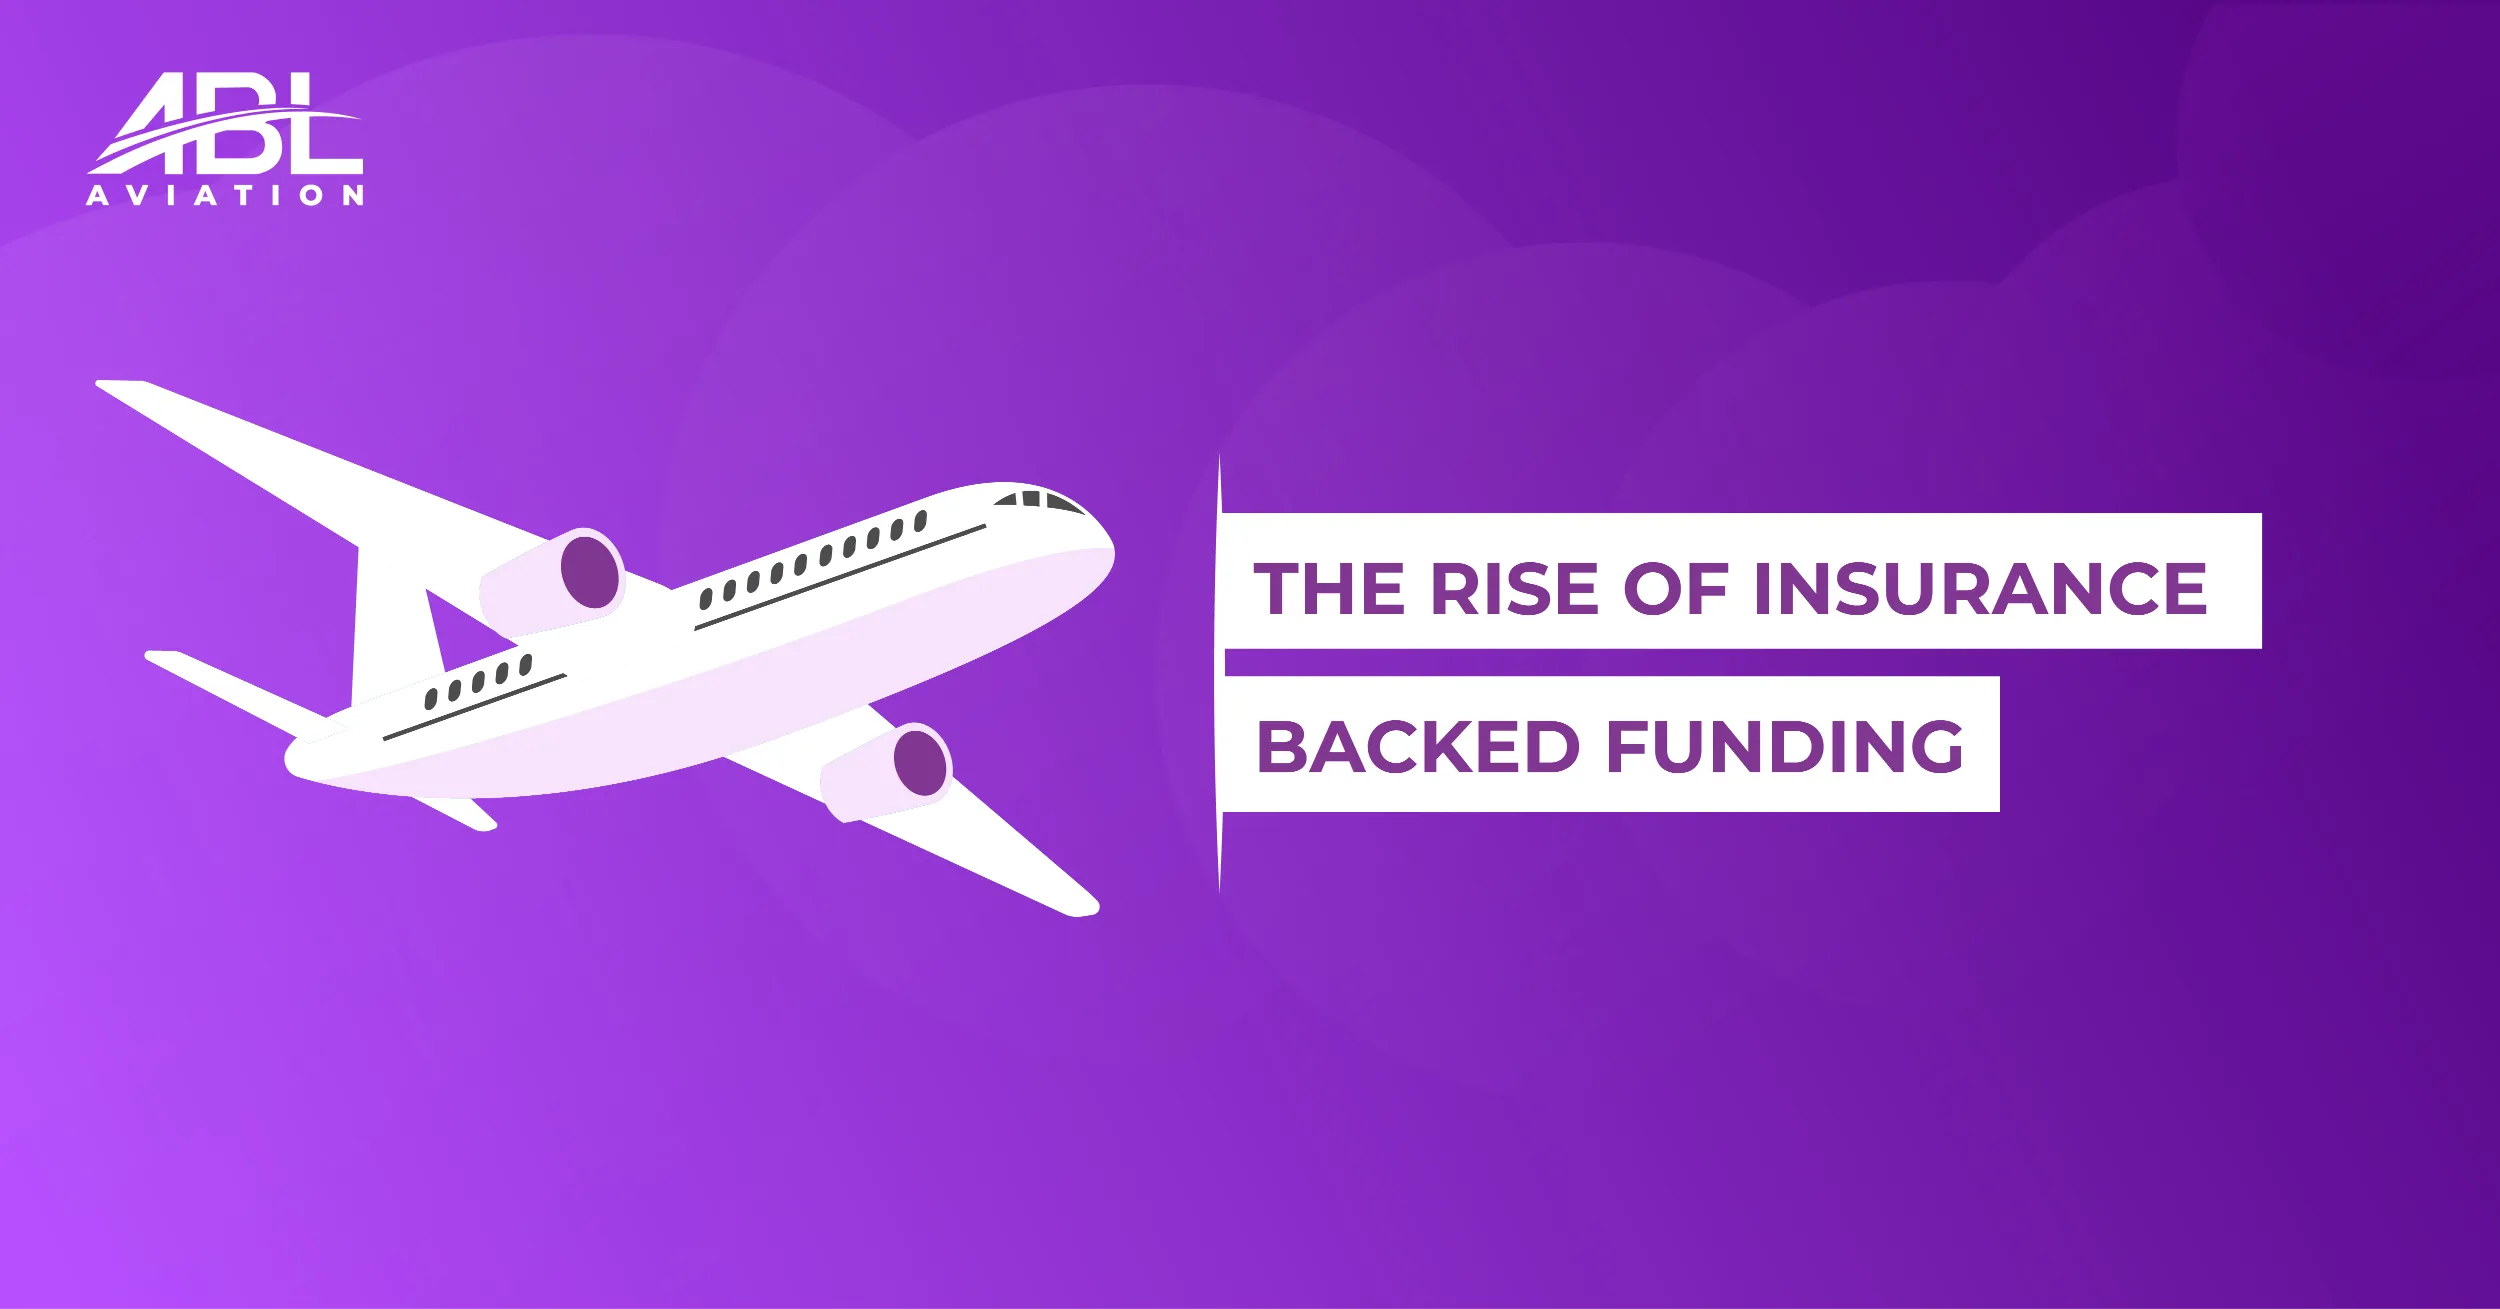 ABL Aviation Releases the July 2021 Insights Report – “The Rise of Insurance-Backed Funding”